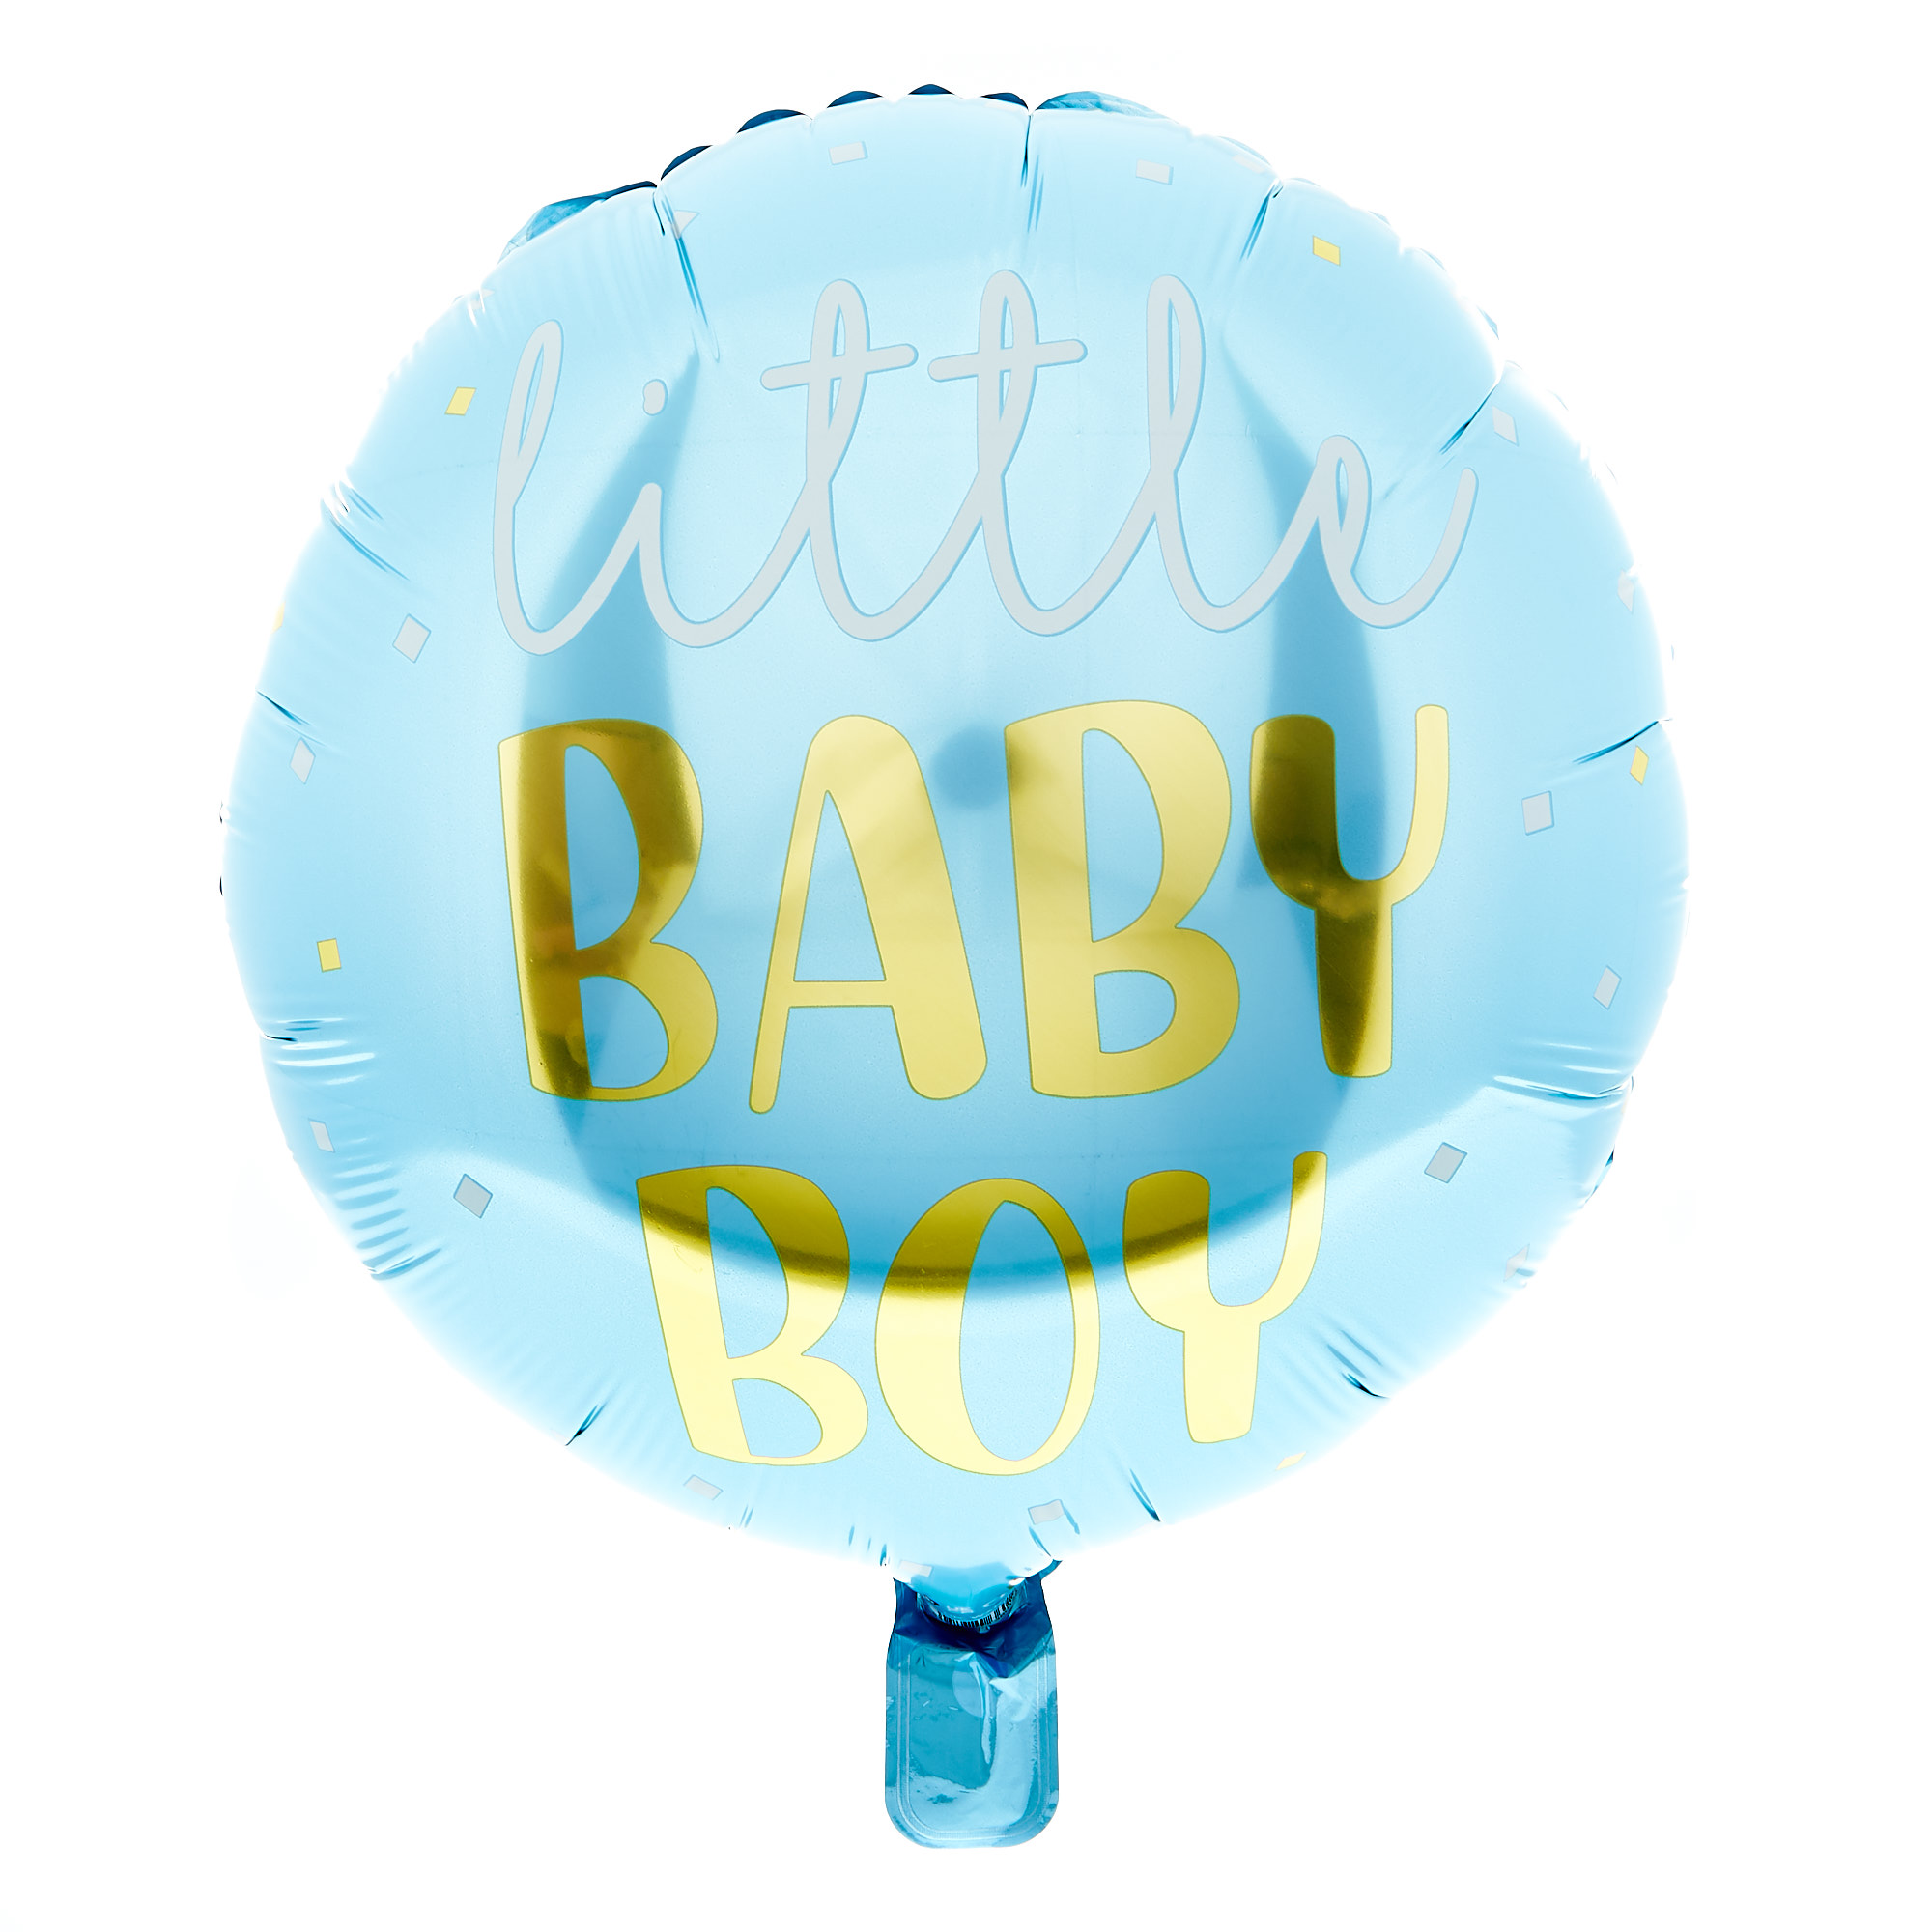 Little Baby Boy Balloon Bouquet - DELIVERED INFLATED!